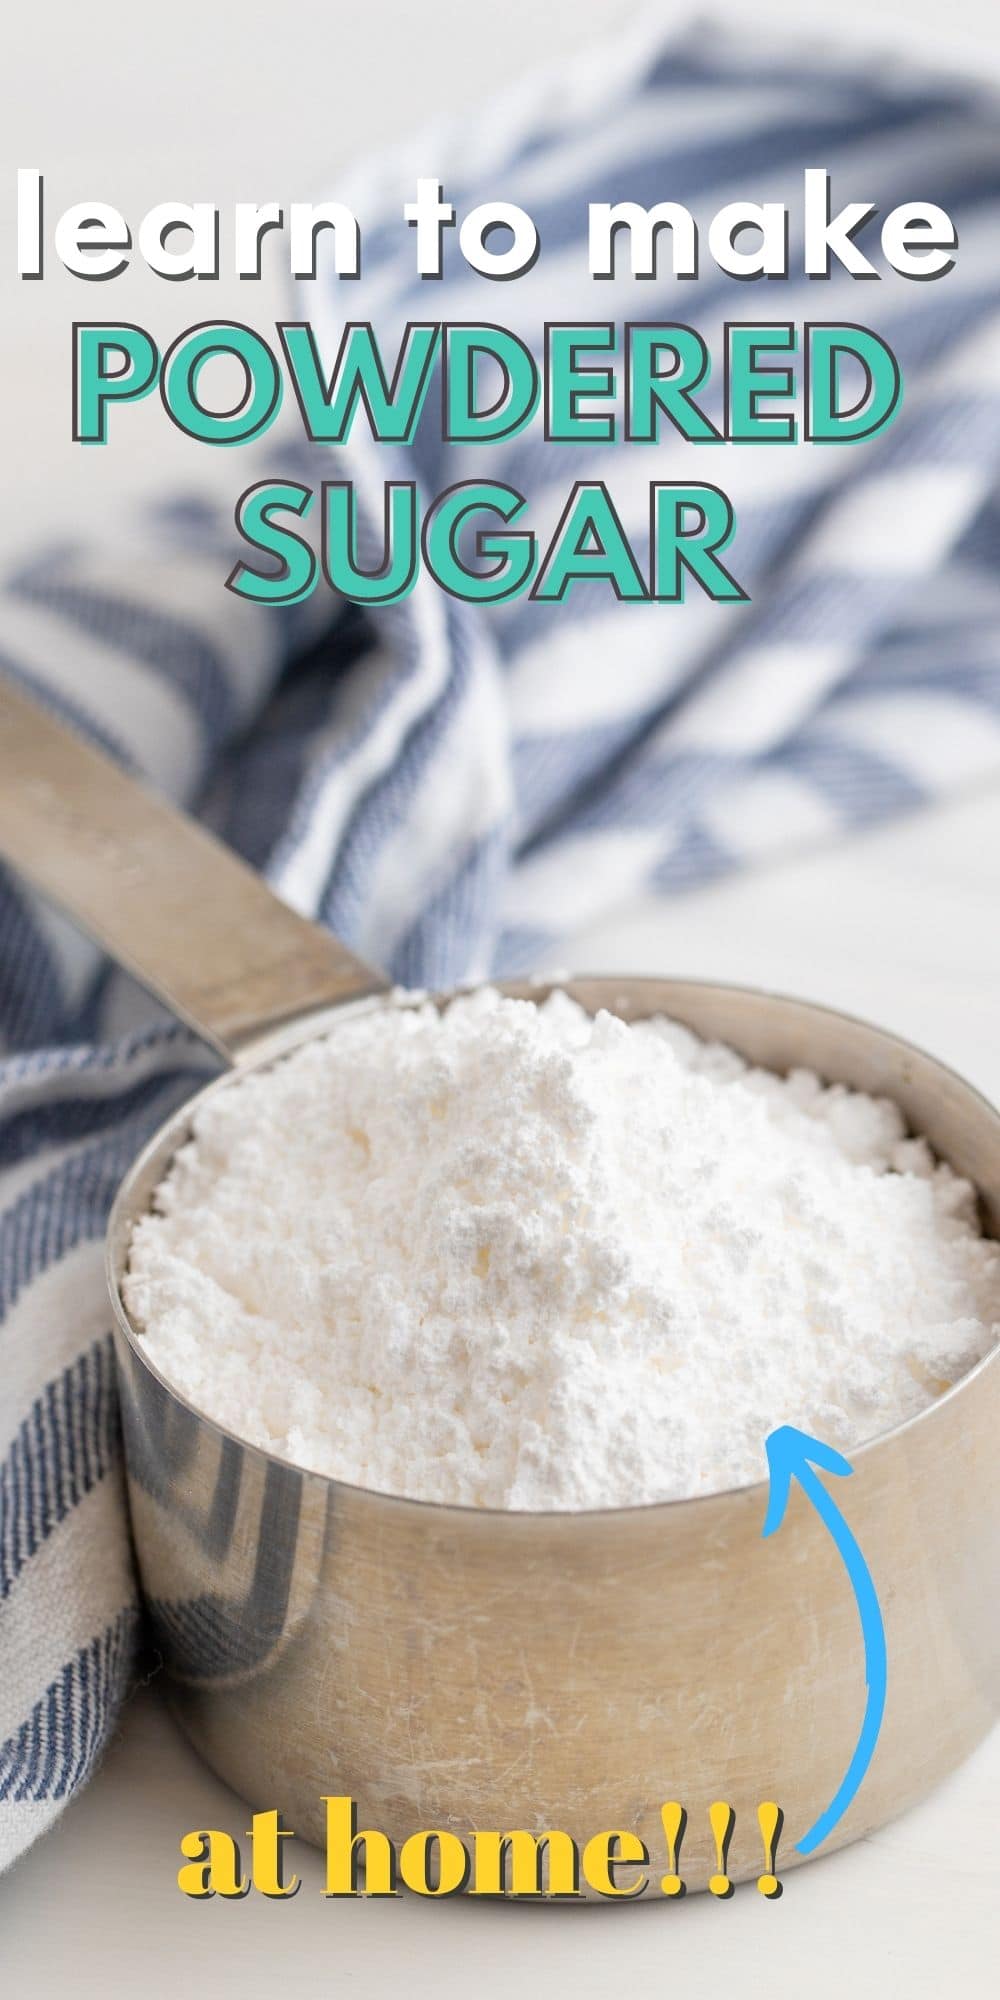 Stainless steel measuring cup full of powdered sugar with post title on top of image